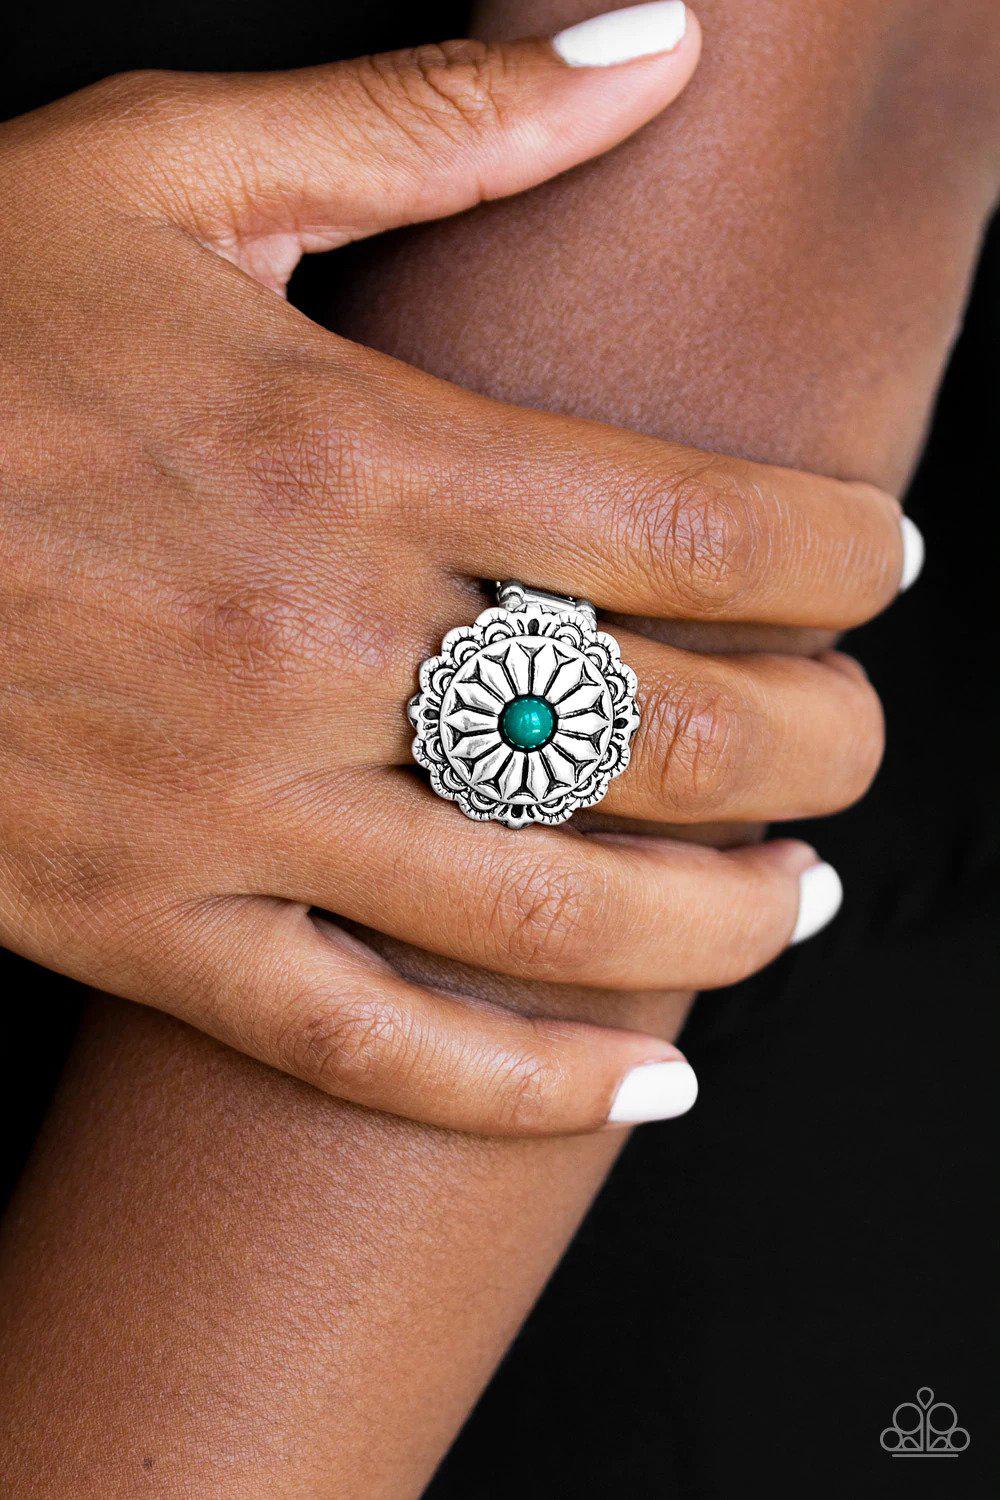 Daringly Daisy Green Ring - Paparazzi Accessories- lightbox - CarasShop.com - $5 Jewelry by Cara Jewels